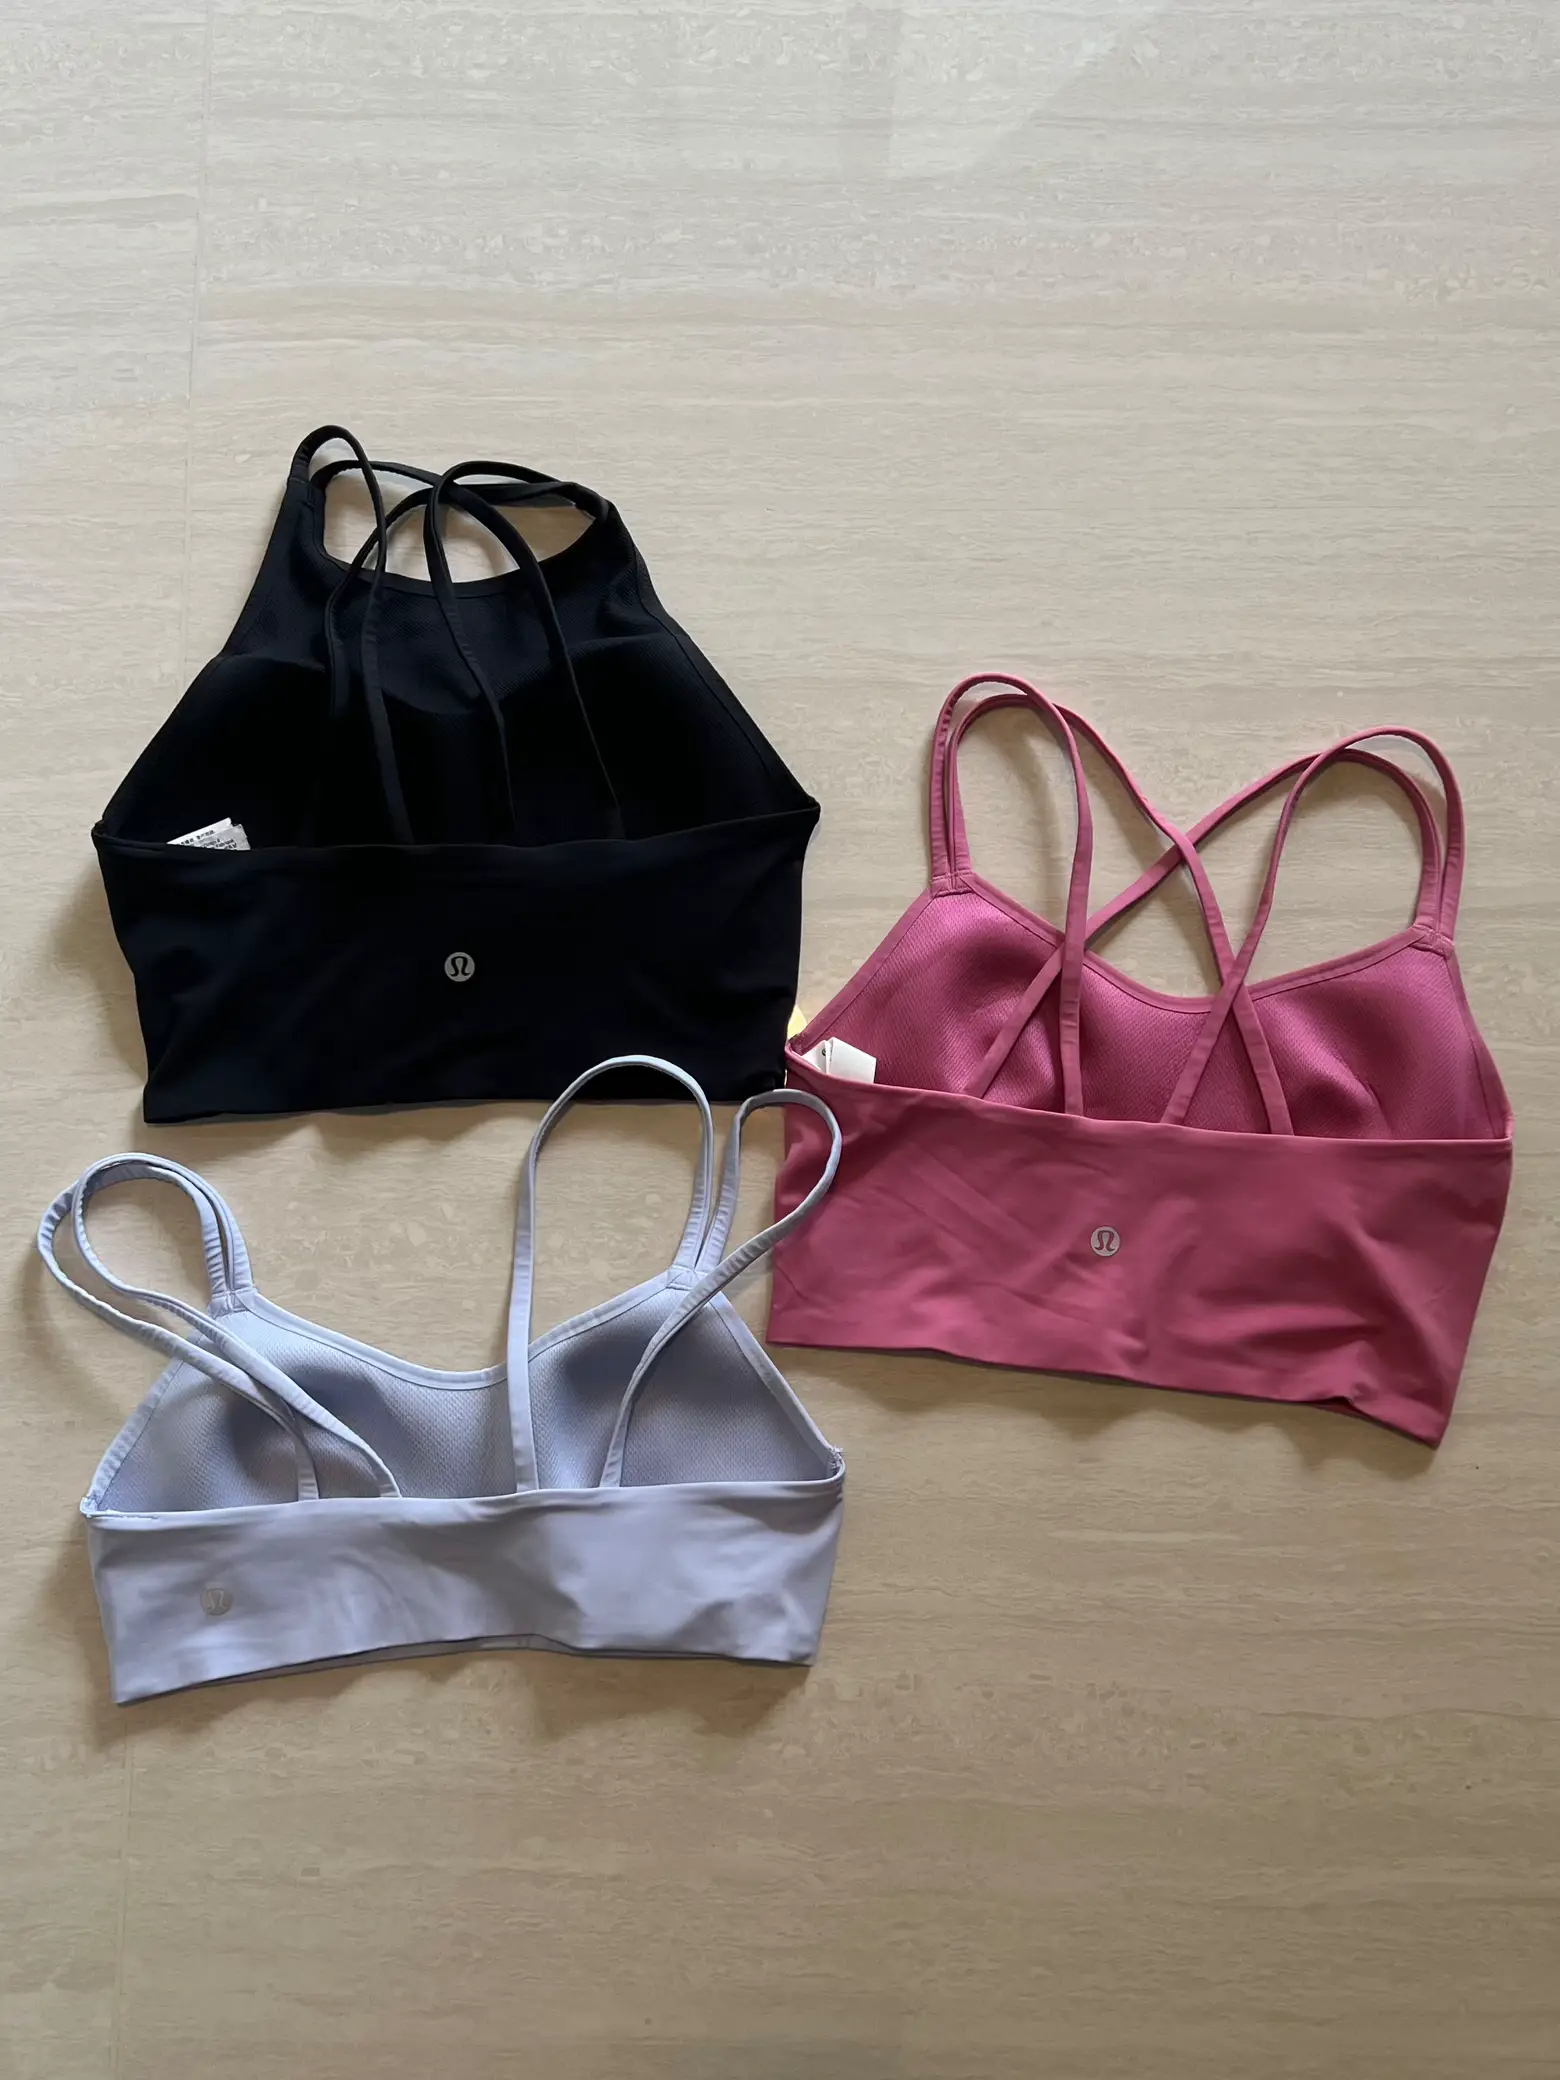 my lululemon like a cloud bra collection ☁️, Gallery posted by ✿ drew ✿